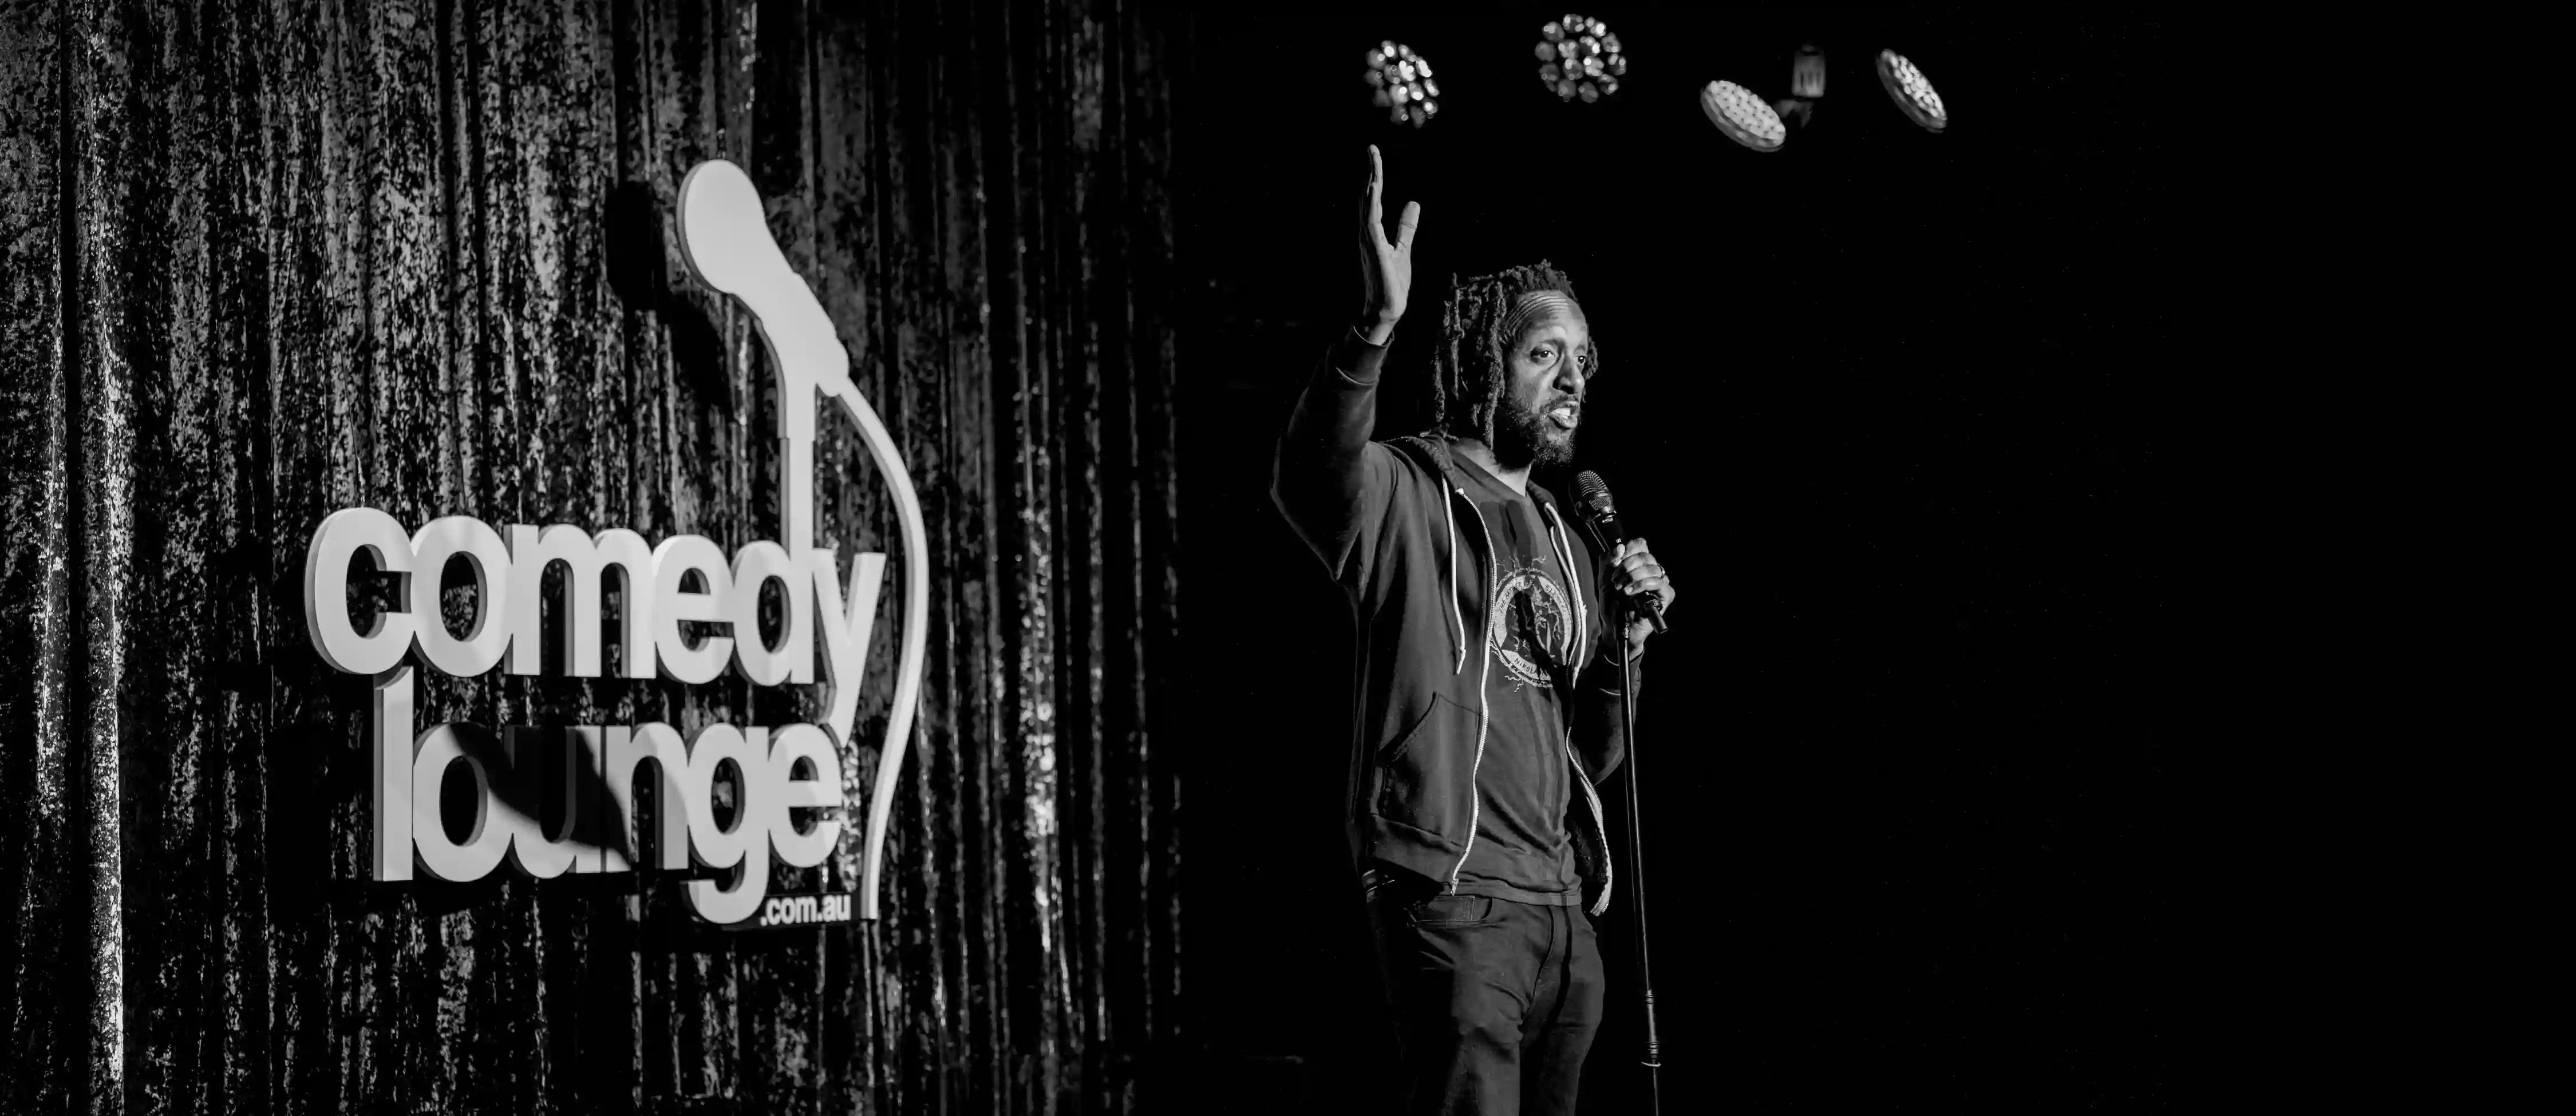 Comedy Lounge Perth Club standup shows this week - Live comedy performances featuring top comedians.